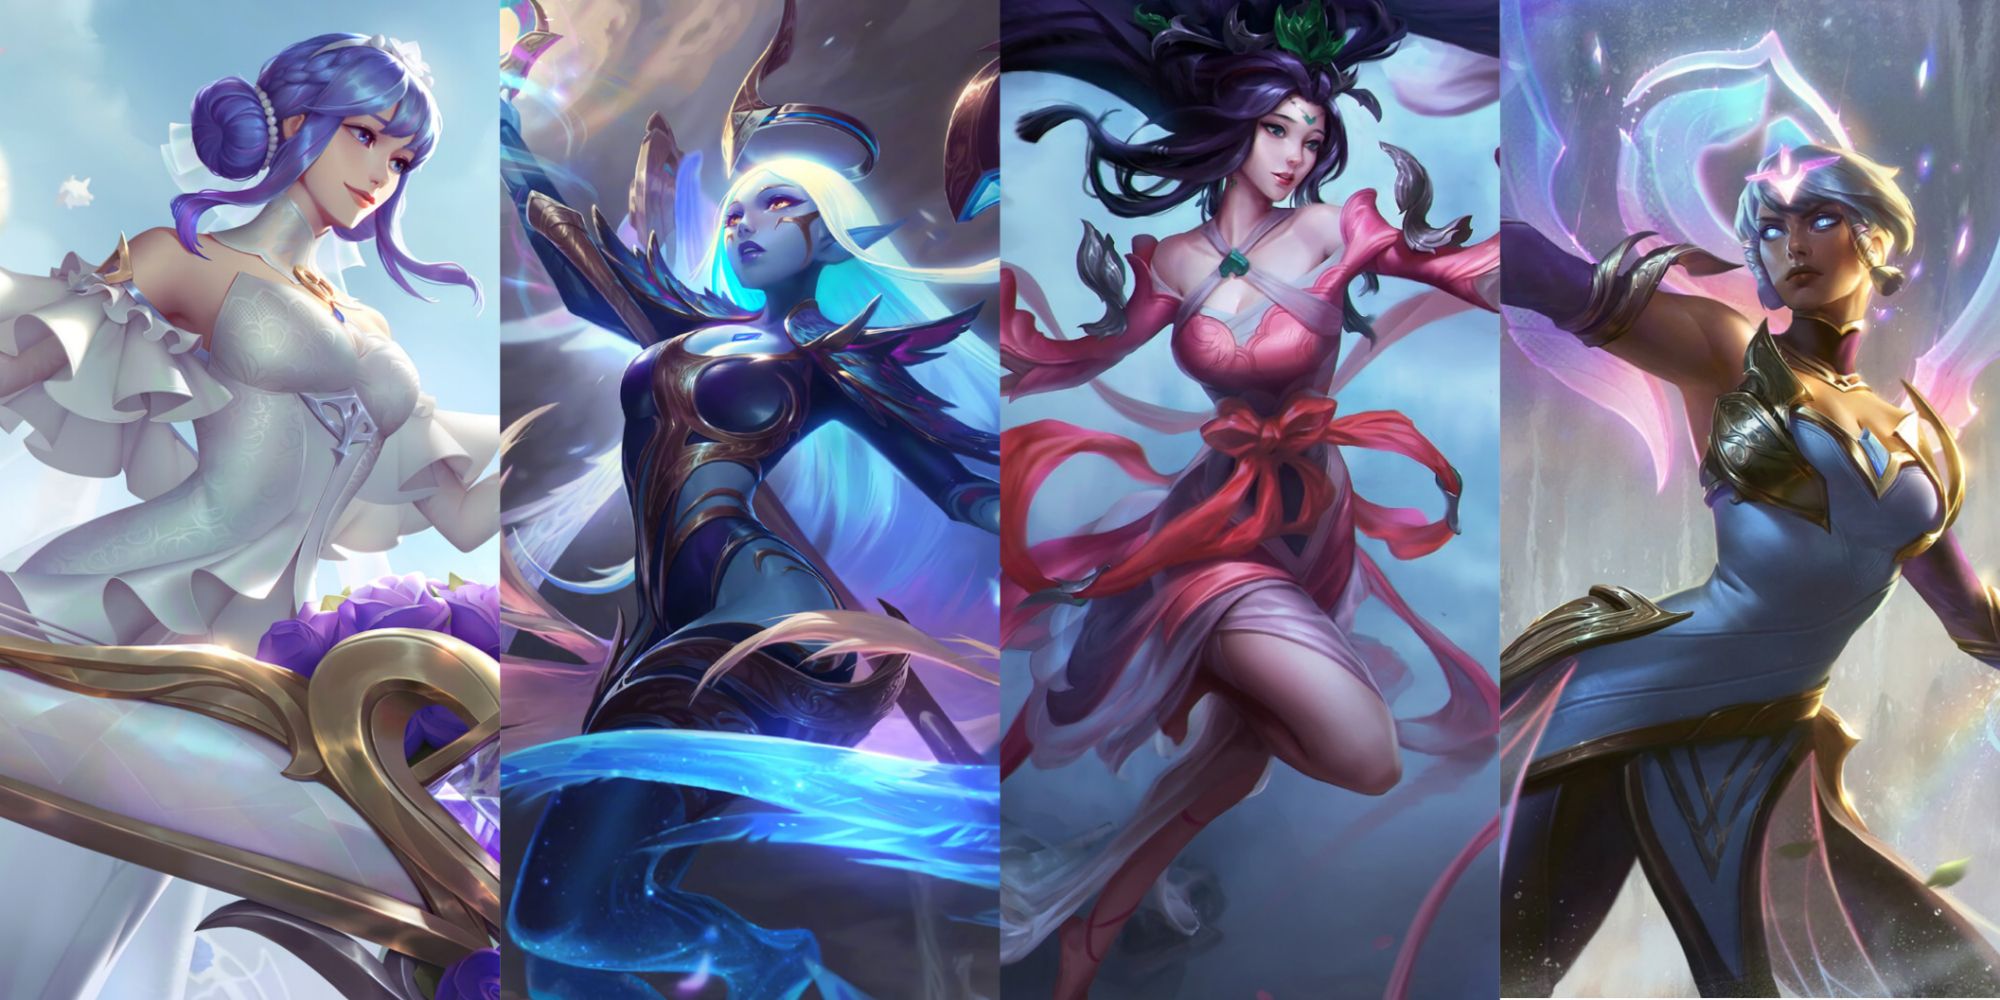 Enchanter Support Cover from left to right featuring: Crystal Rose Sona from Wild Rift, Soraka, Janna, and Karma